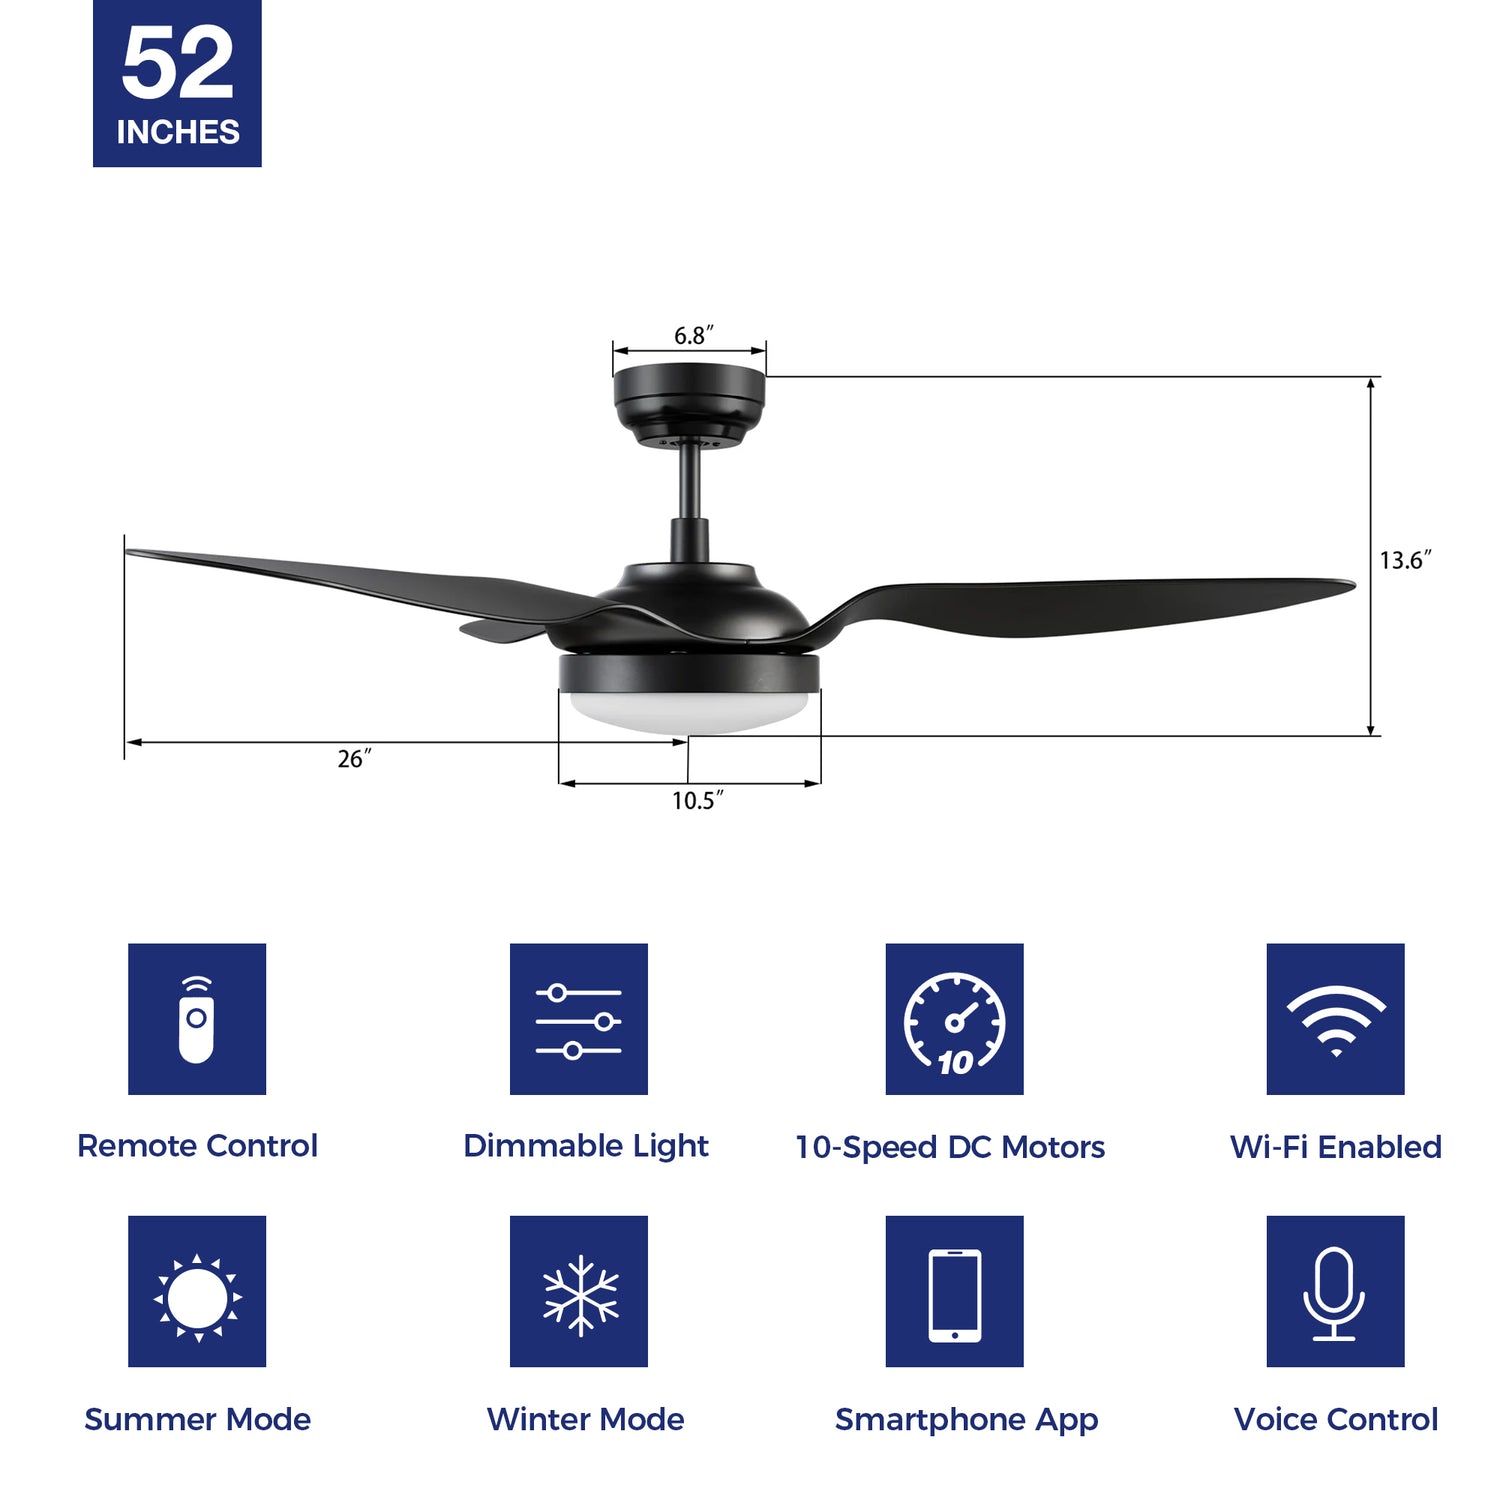 Detail size of Falkirk 52 inch smart ceiling fan with light, indoor and outdoor used. 